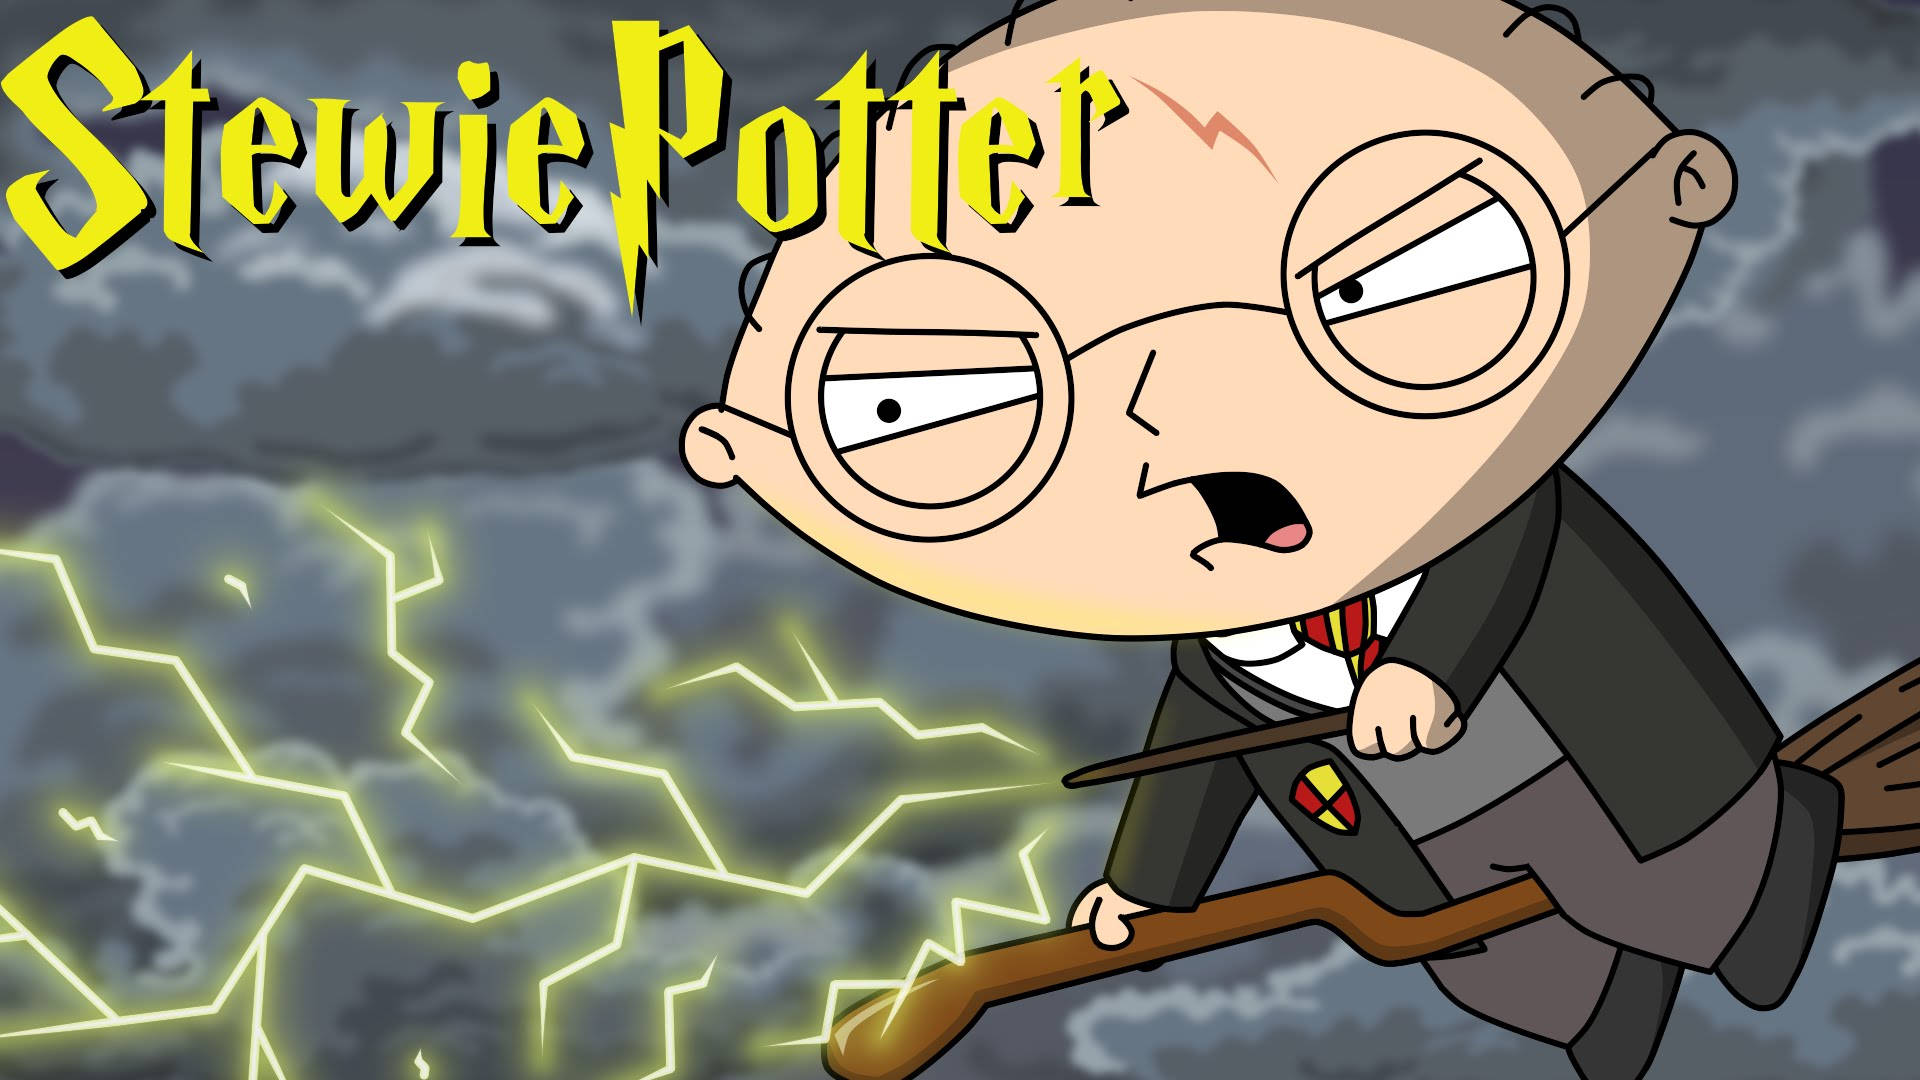 Stewie Griffin As Harry Potter